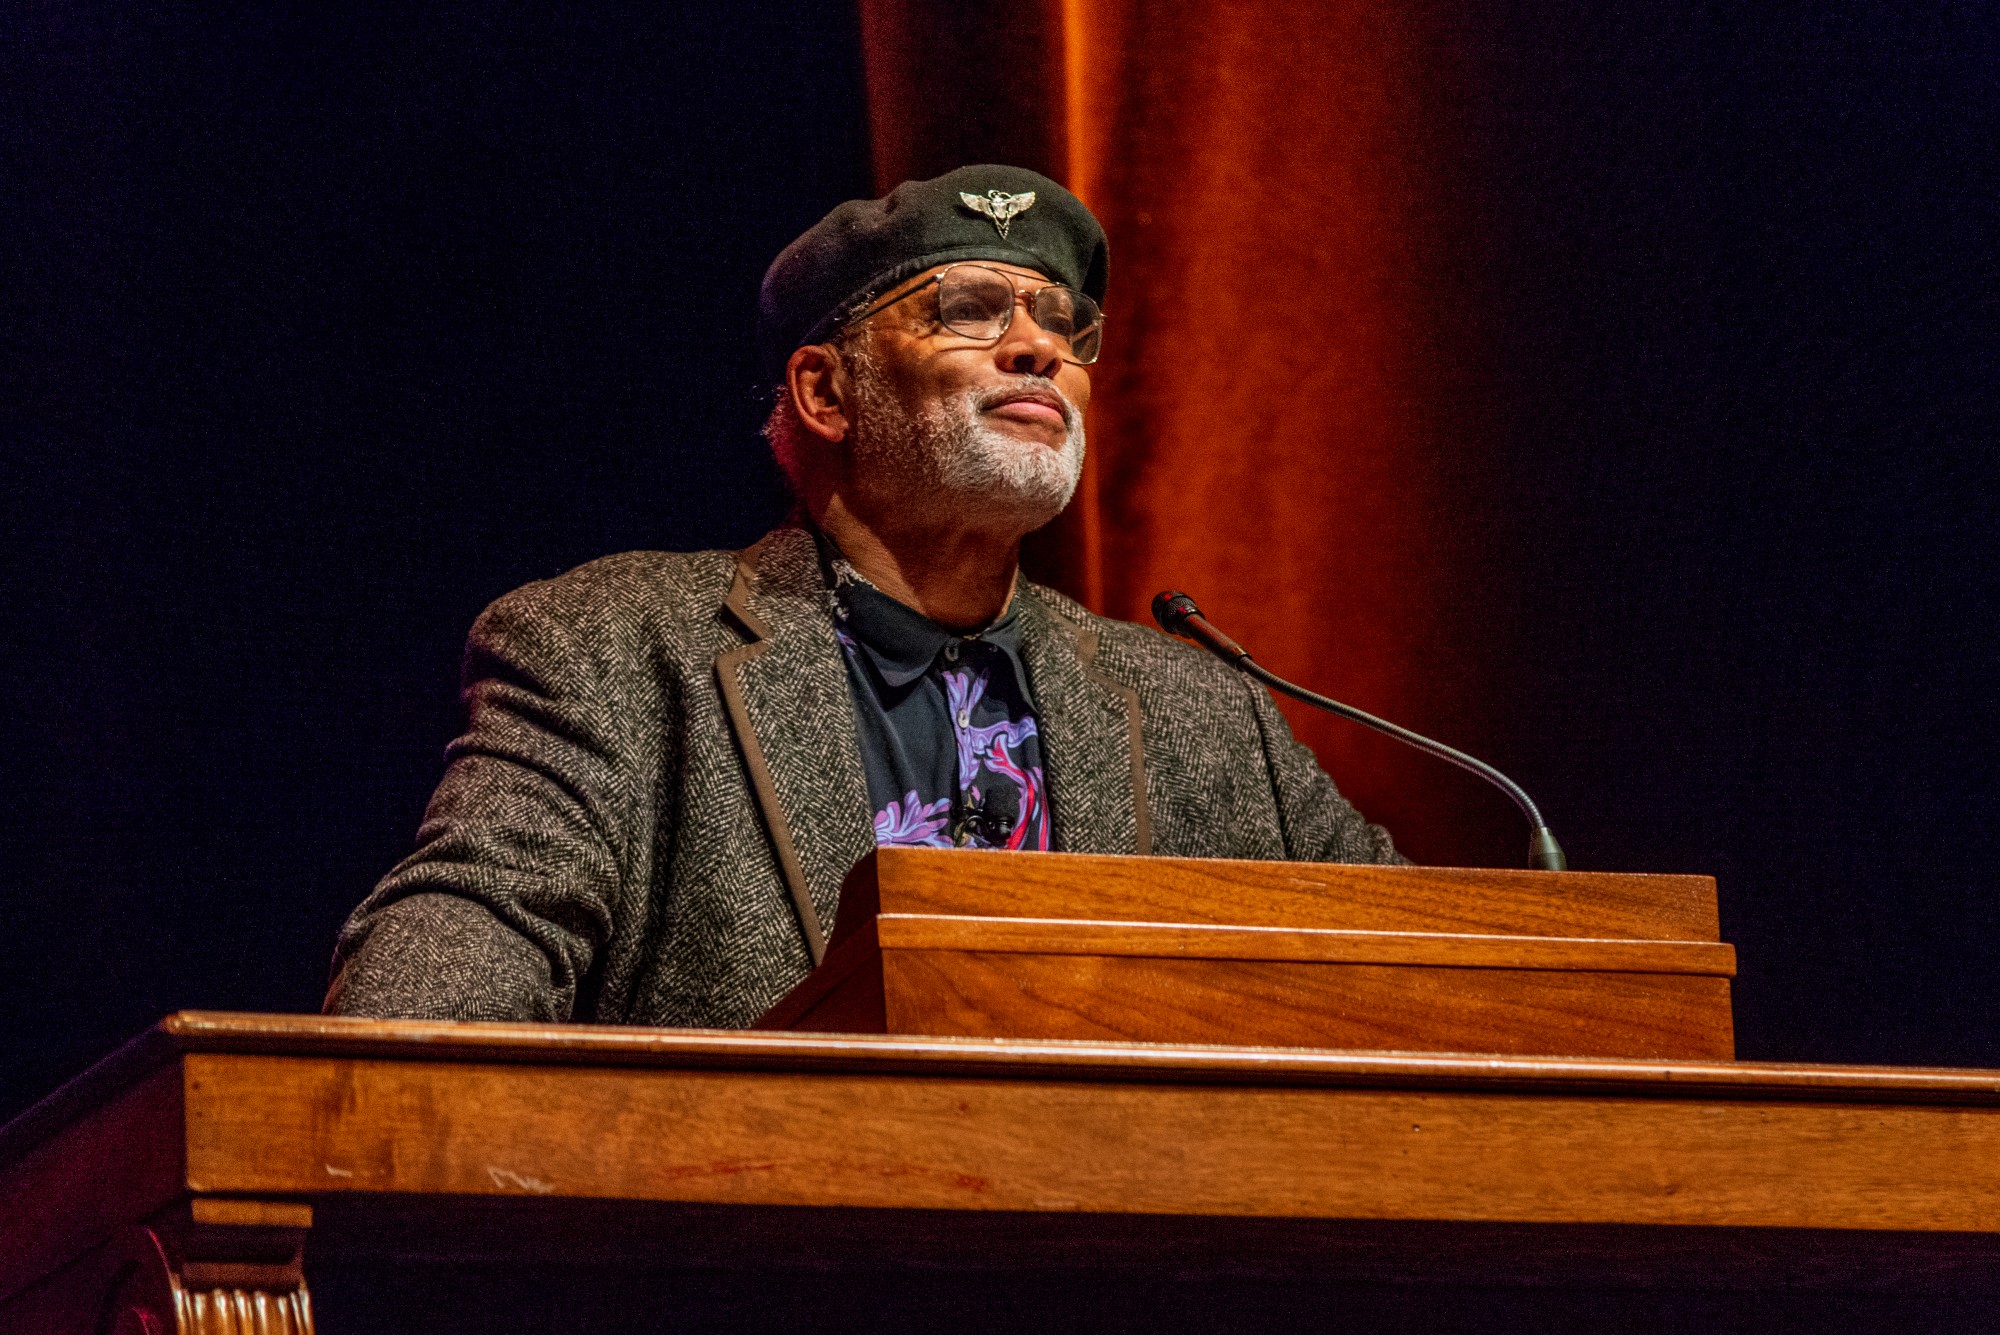 Activist John Wright discusses the “This Free North” documentary at Northrop Auditorium on Tuesday, Feb. 18. The event included a documentary premiere and a discussion about black history at the University of Minnesota.